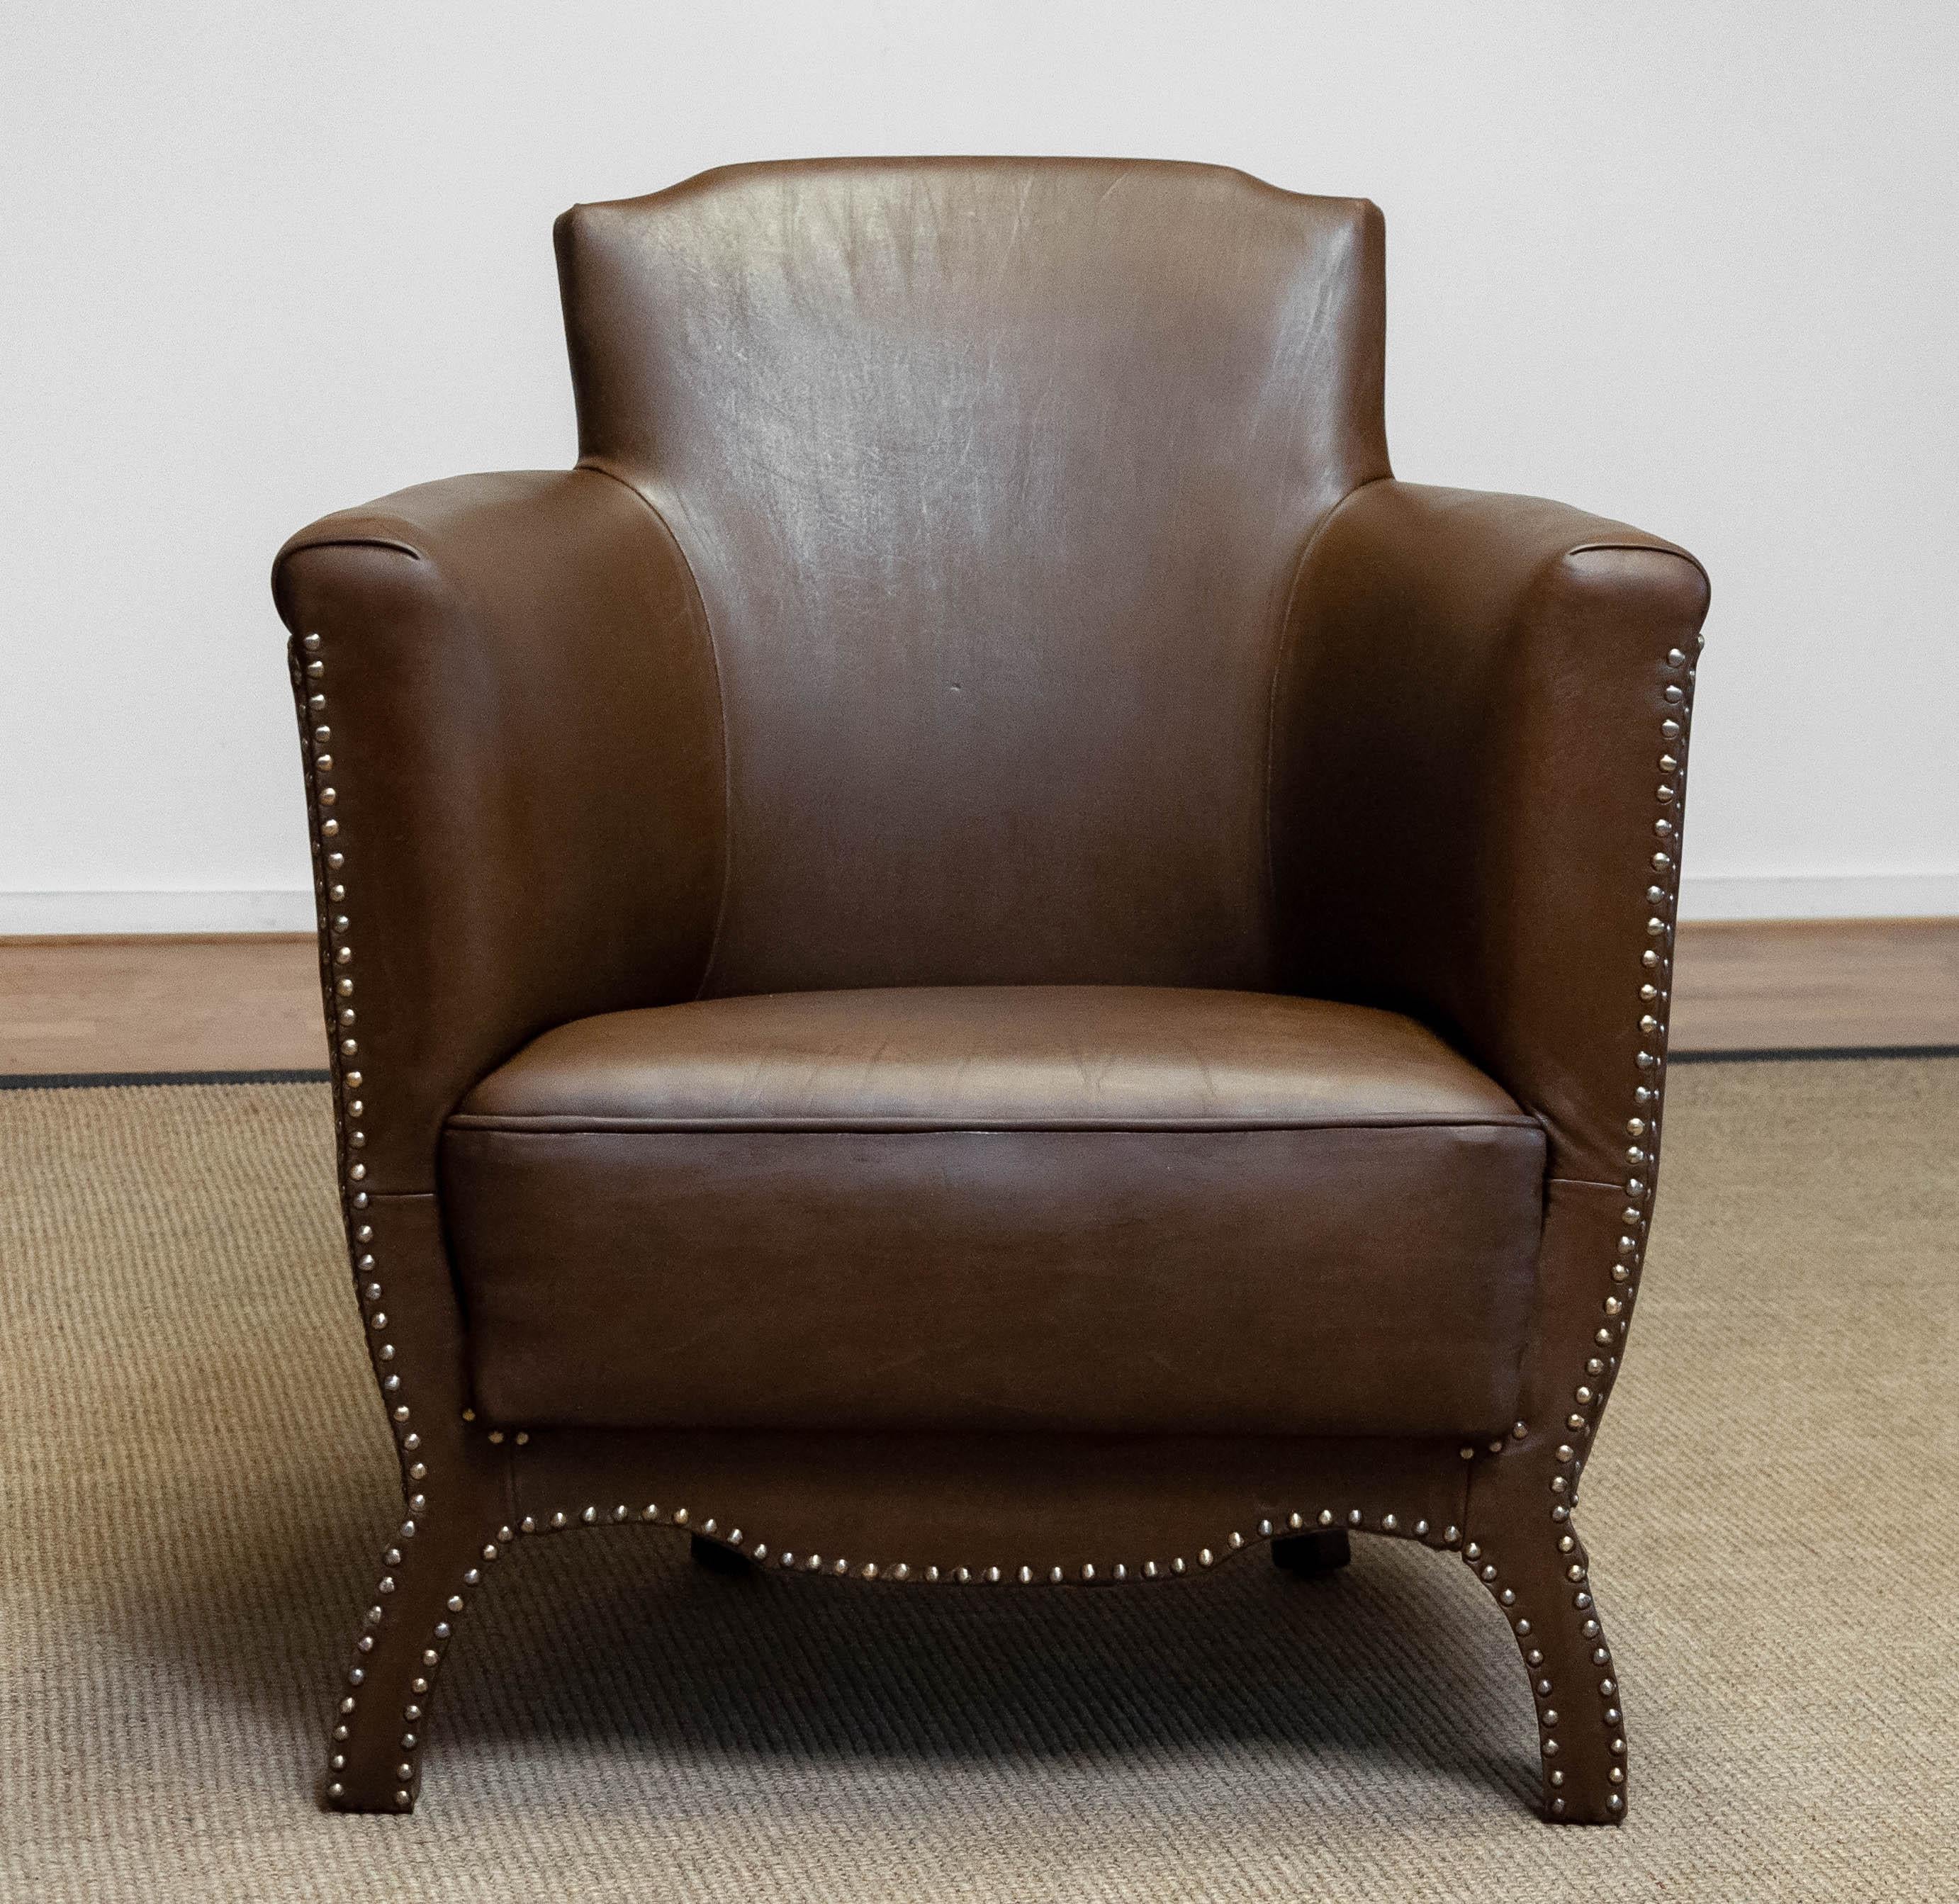 1930s Swedish Tan / Brown Nailed Leather Lounge Chair By Otto Schultz For Boet For Sale 5